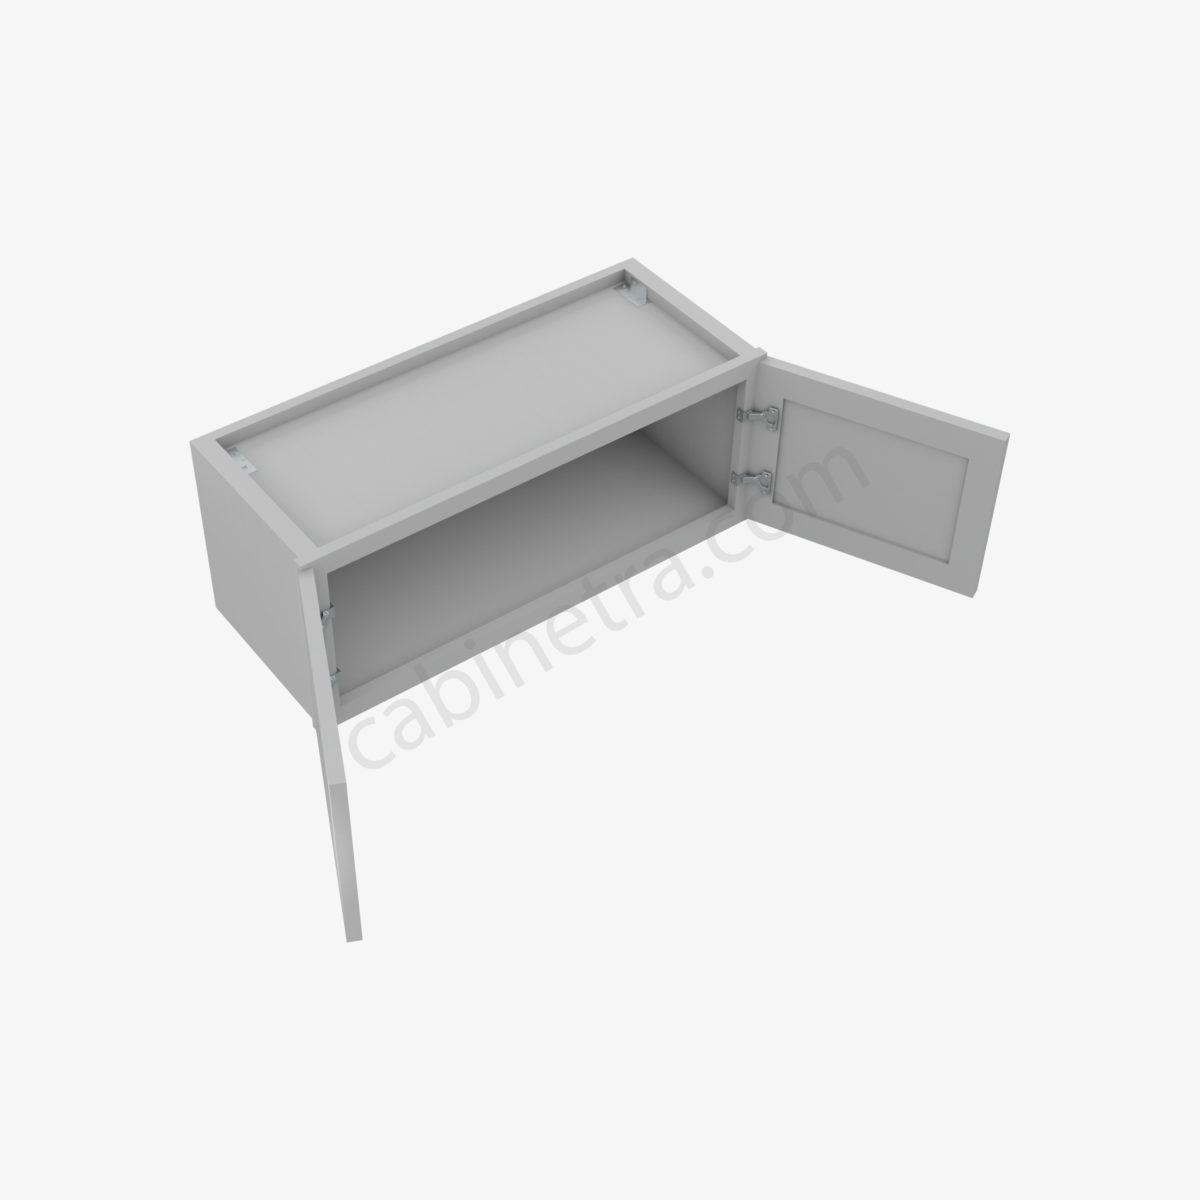 AB W3012B 2 Forevermark Lait Gray Shaker Cabinetra scaled